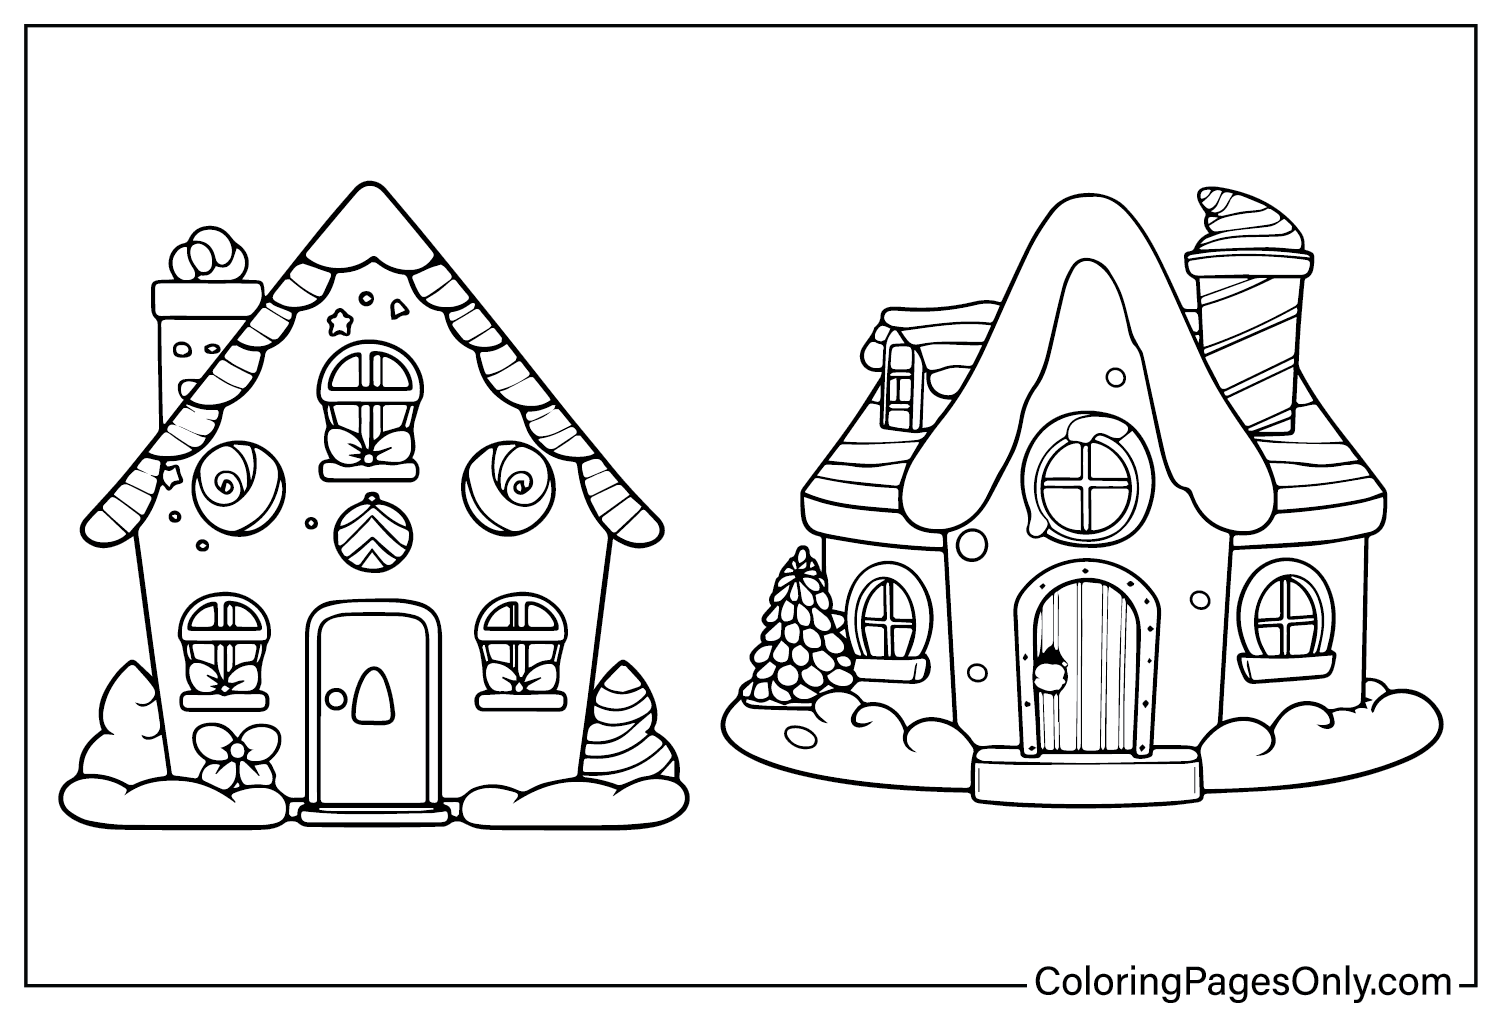 Coloring Sheet Gingerbread House from Gingerbread House